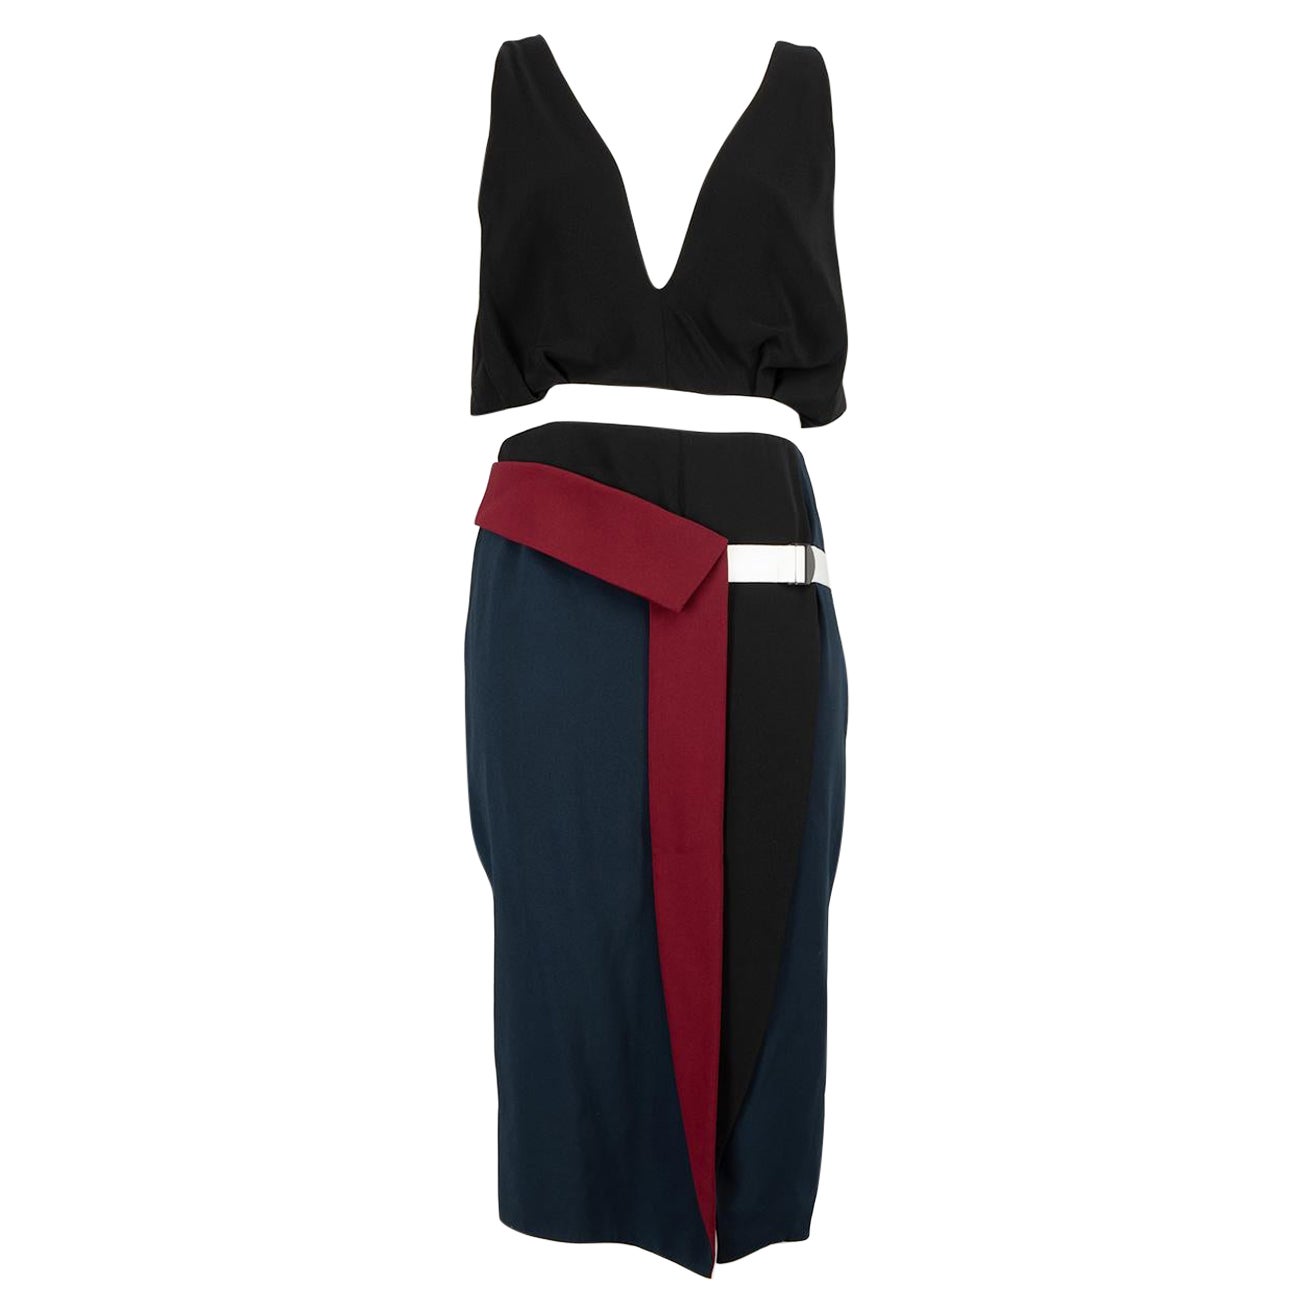 Peter Pilotto Sleeveless Buckled Knee-Length Dress Size L For Sale